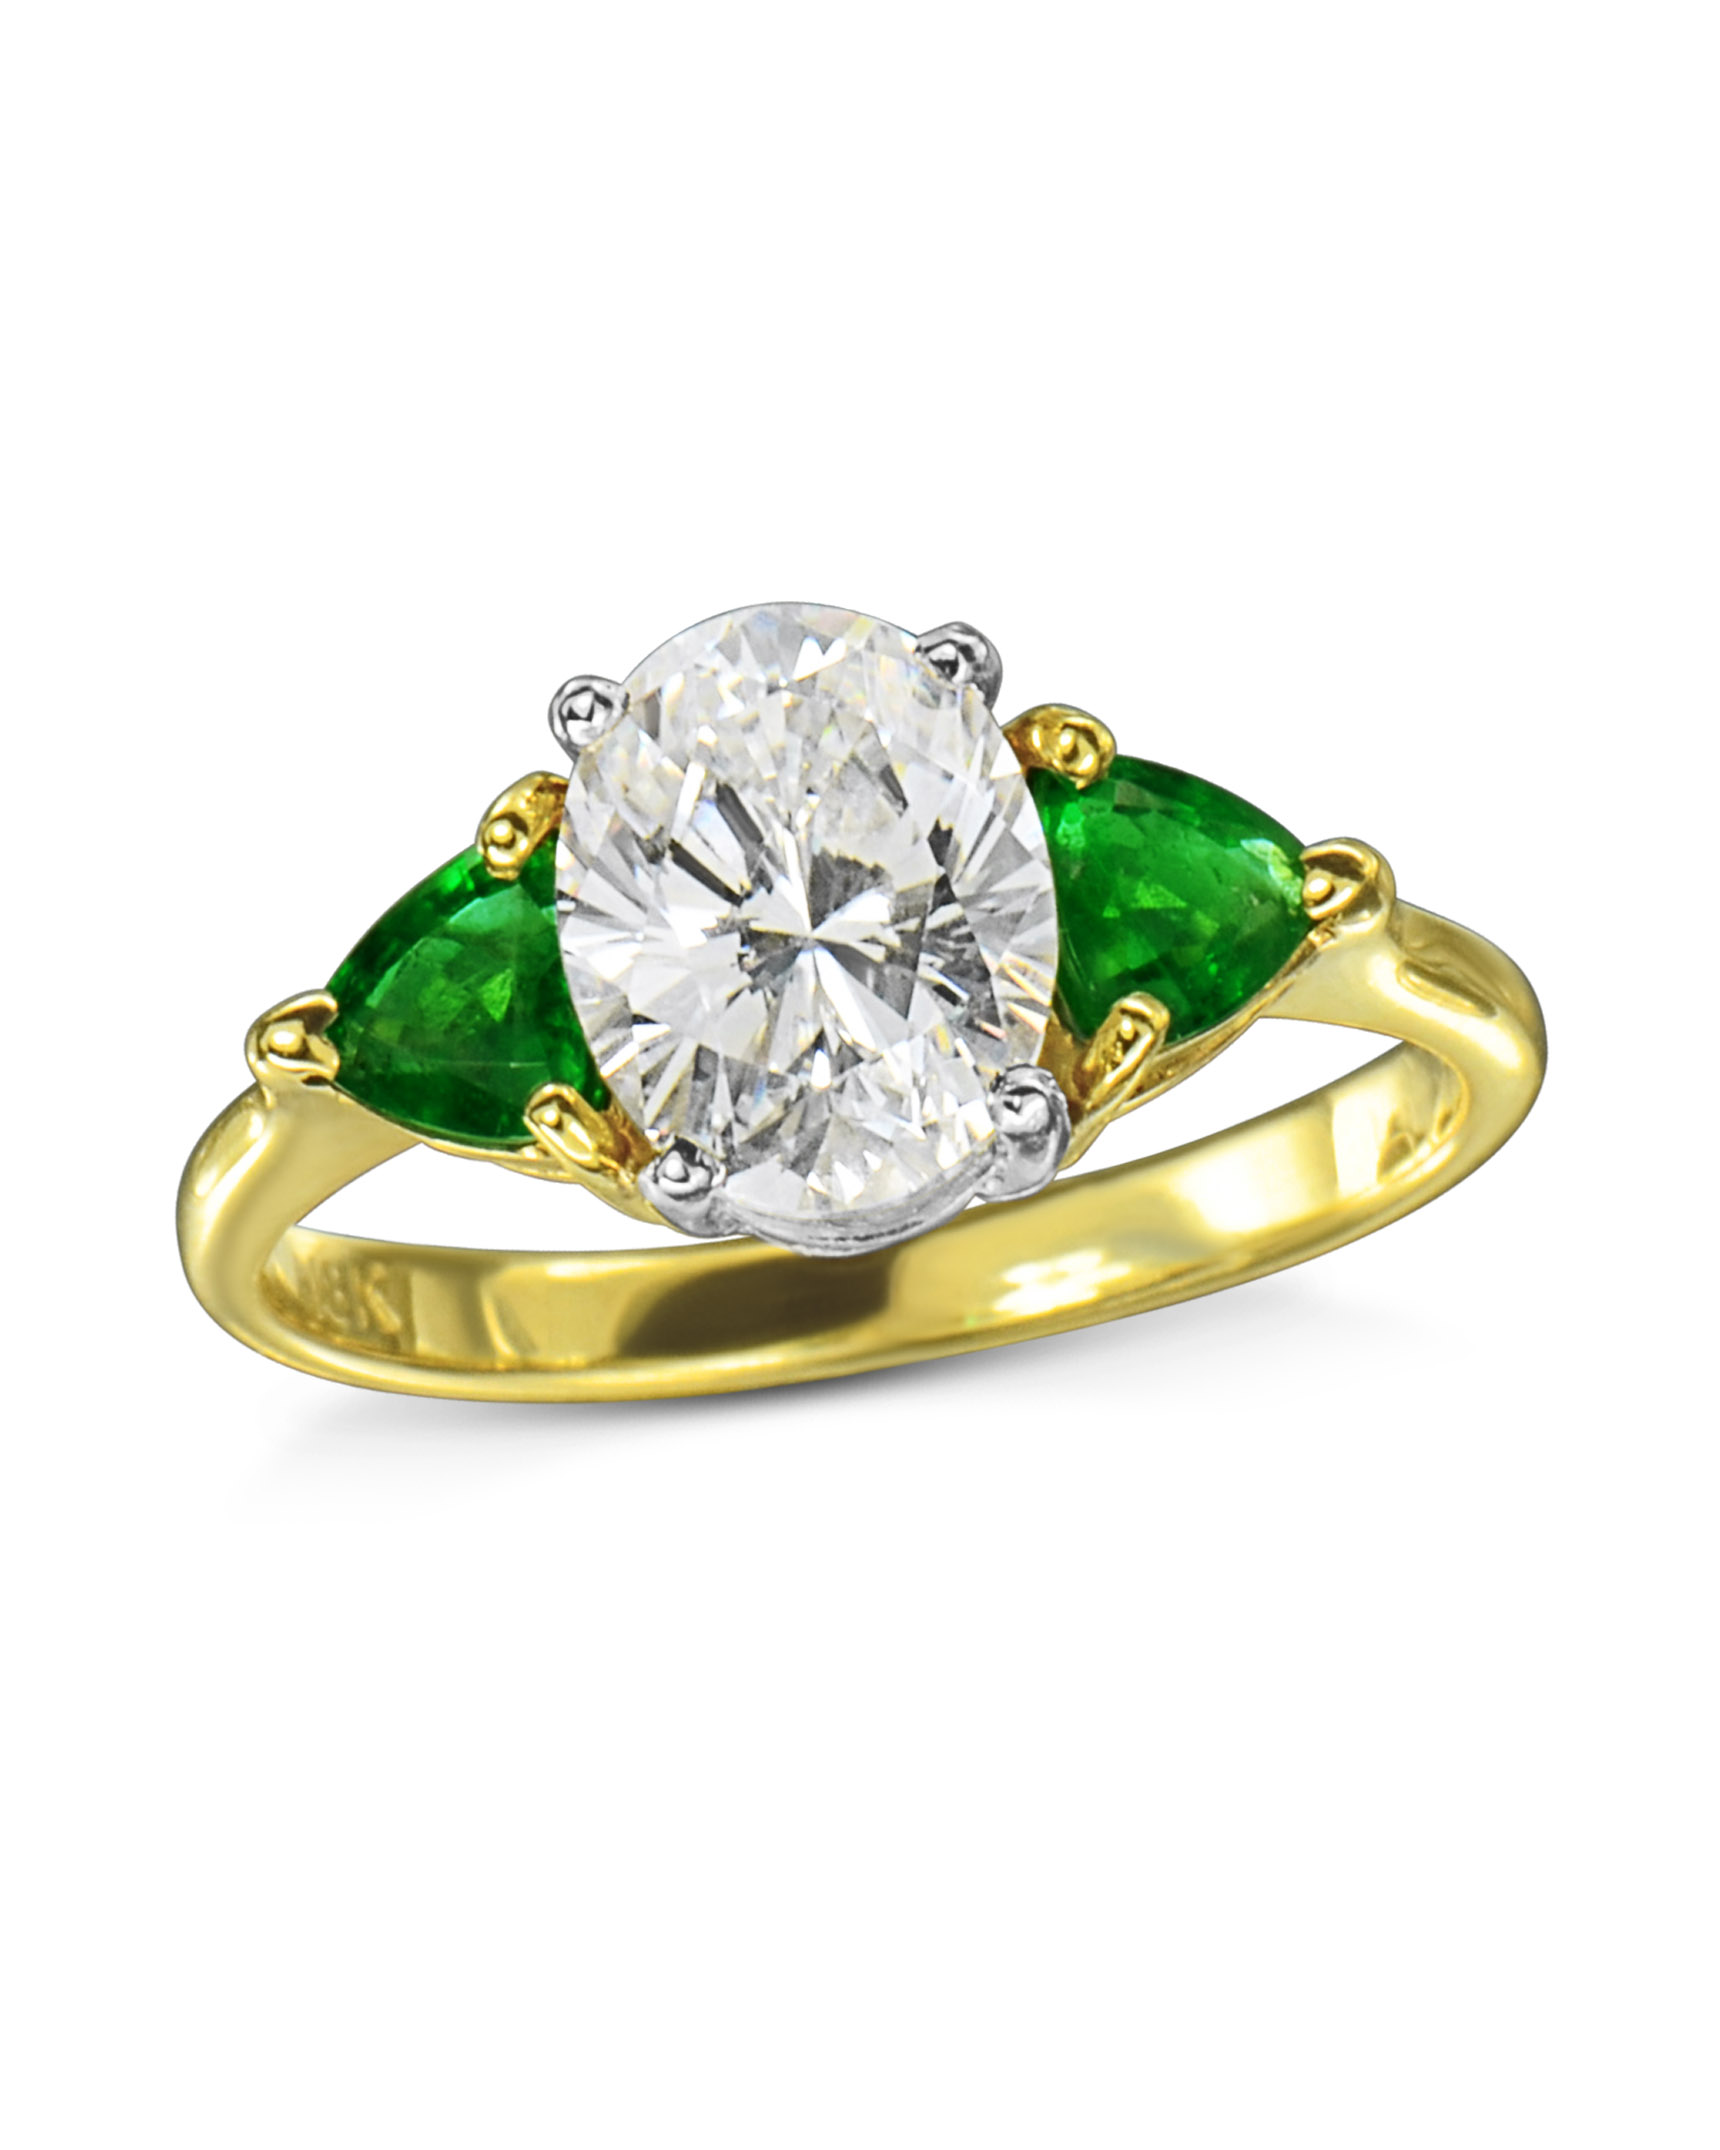 Amazon.com: Emerald Stone Ring 925 Sterling Silver Statement Ring For Women  Handmade Rings Gemstone Christmas Promise Ring Size US 11 Gift For Her :  Handmade Products